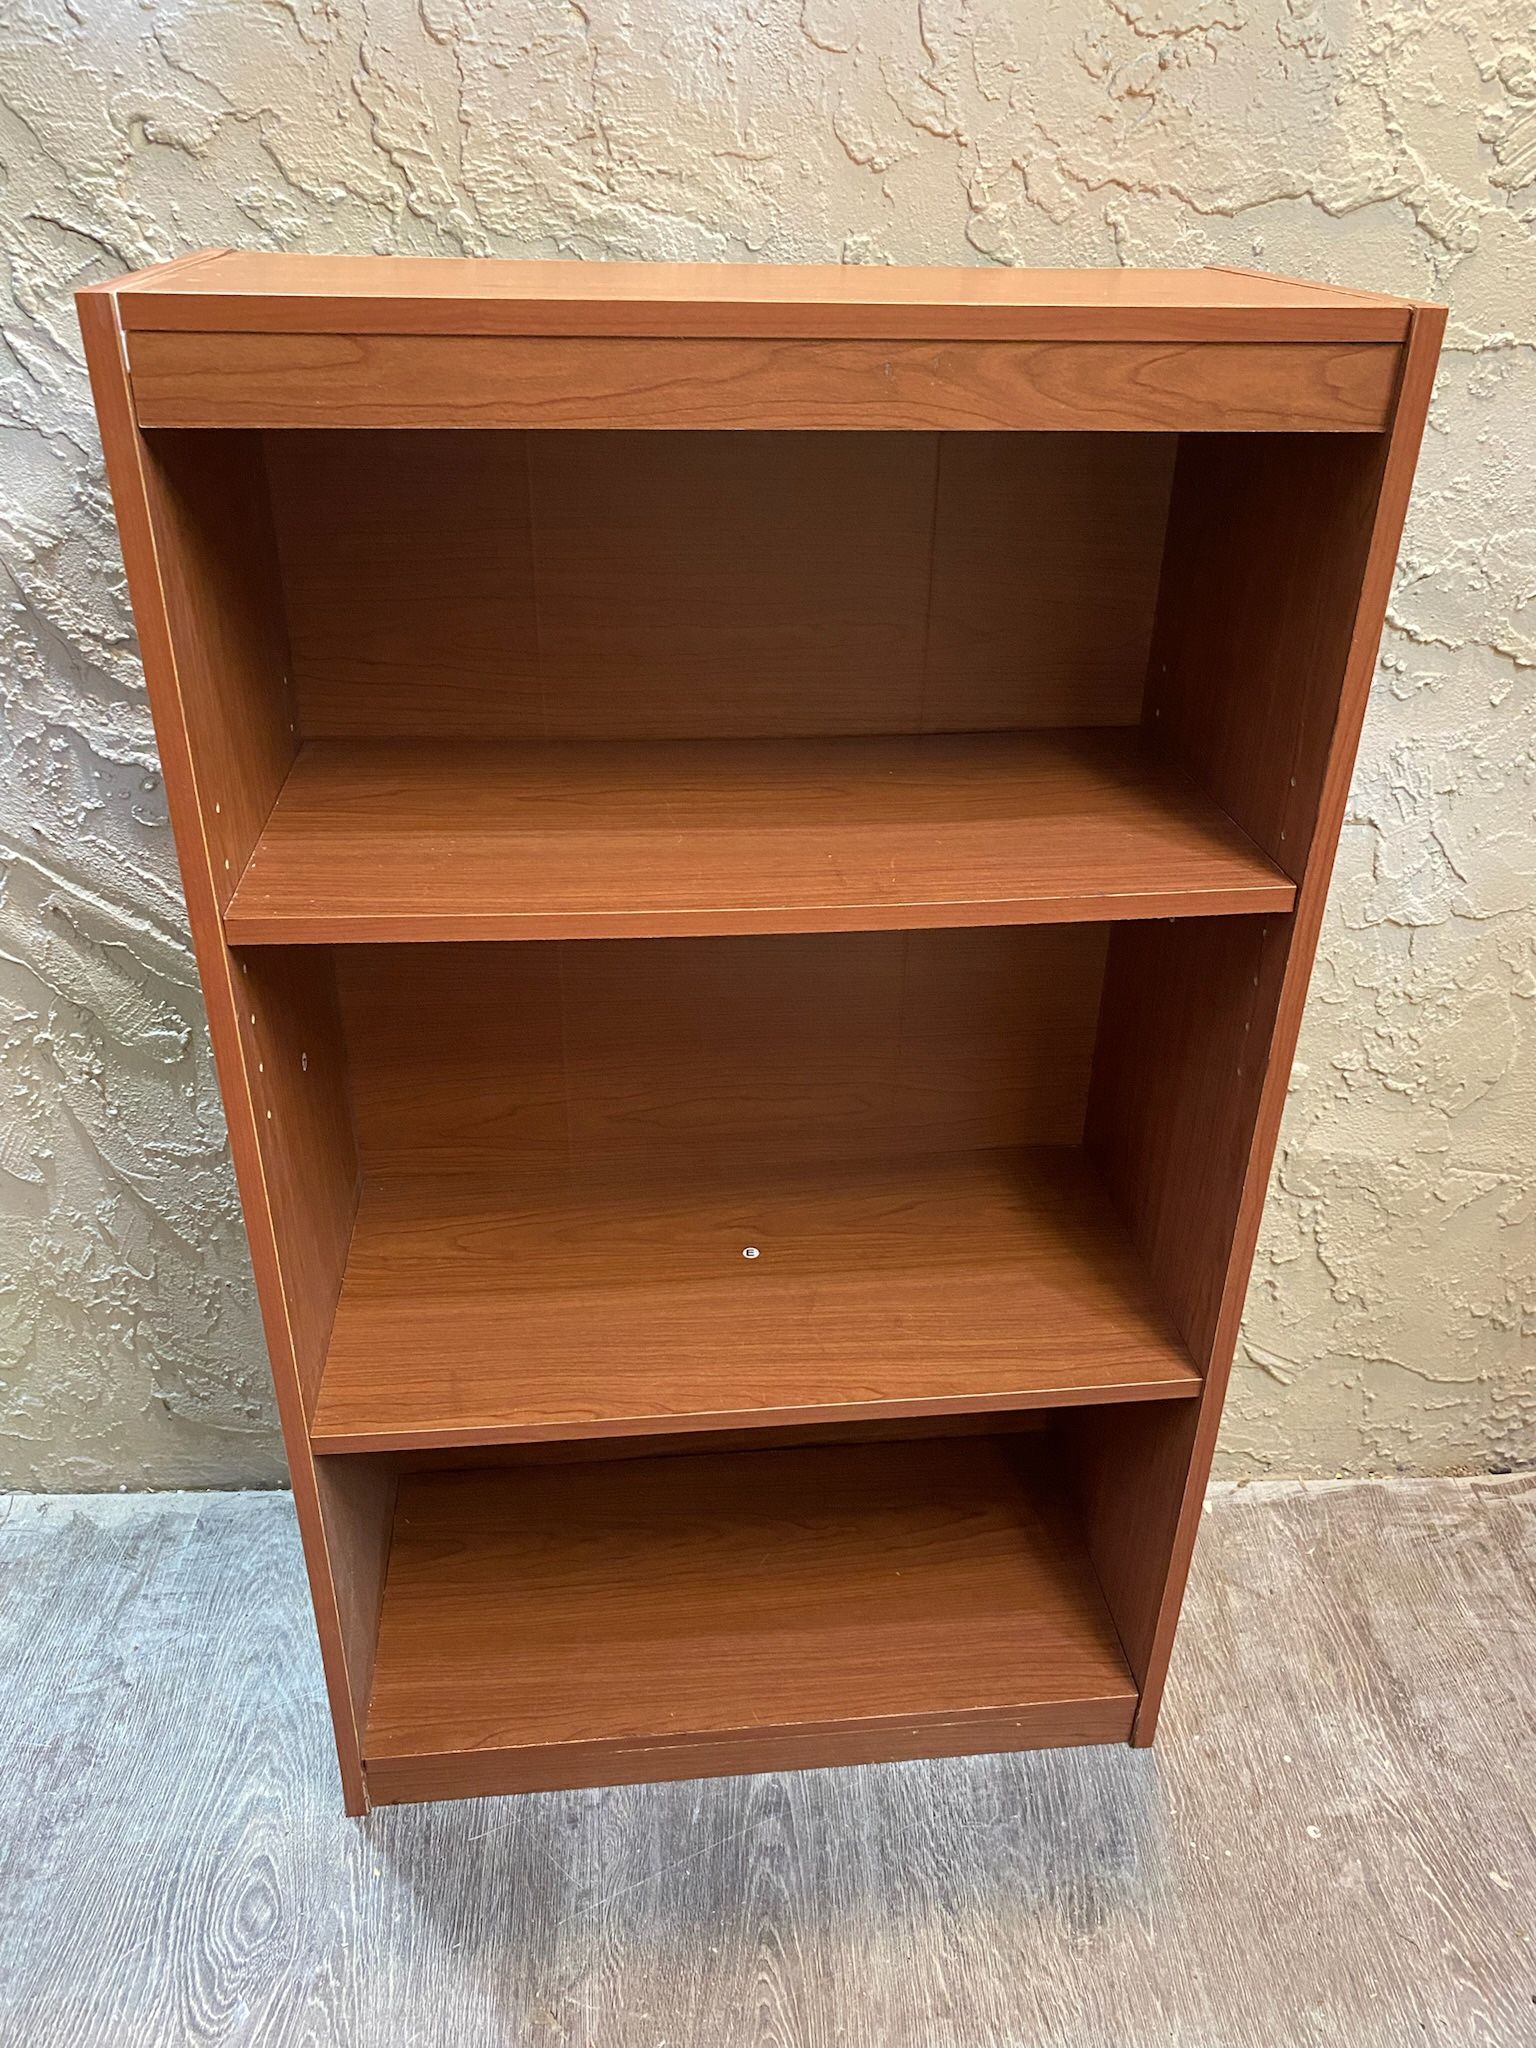 Brown Bookshelf Bookcase Storage (3.5 feet tall) Delivery Available For A Fee- See My Other Items 🙂